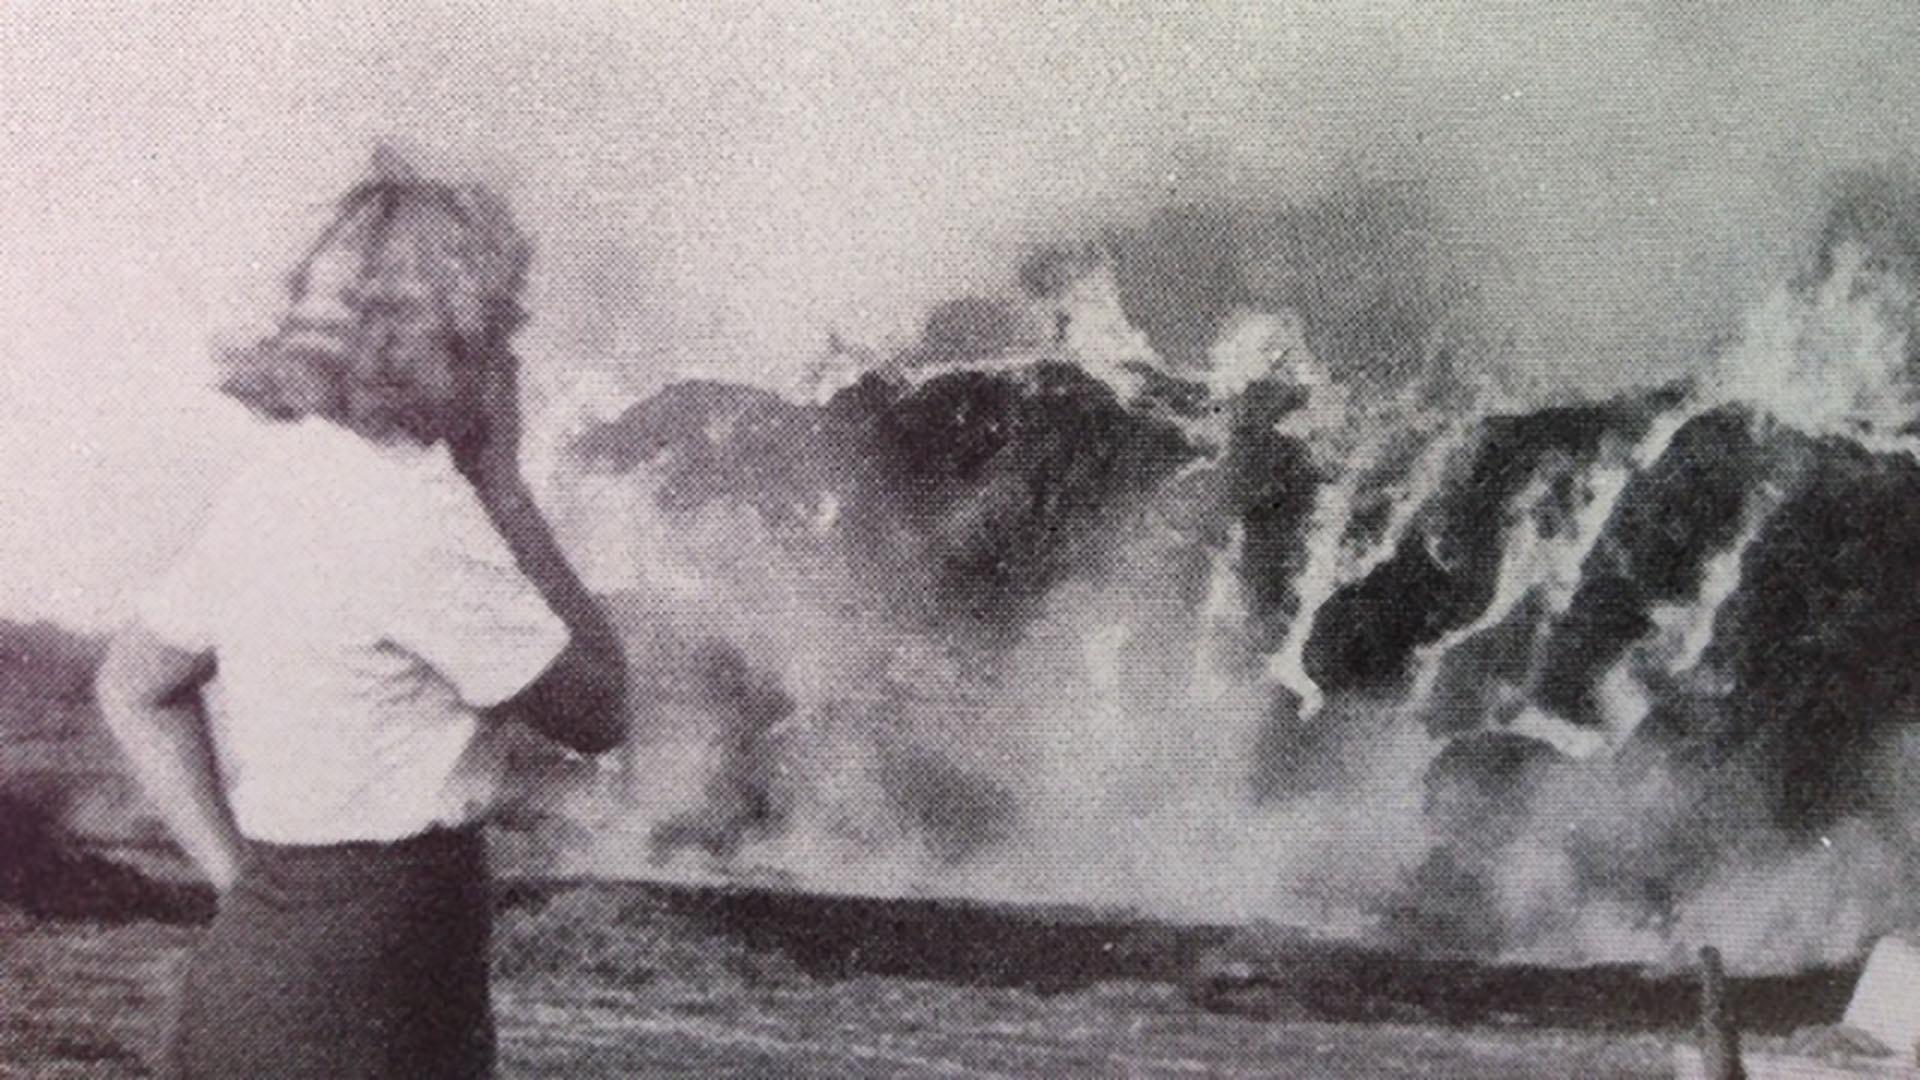 Black and white image of Maria watching the devastation of the Phosphor bombs.